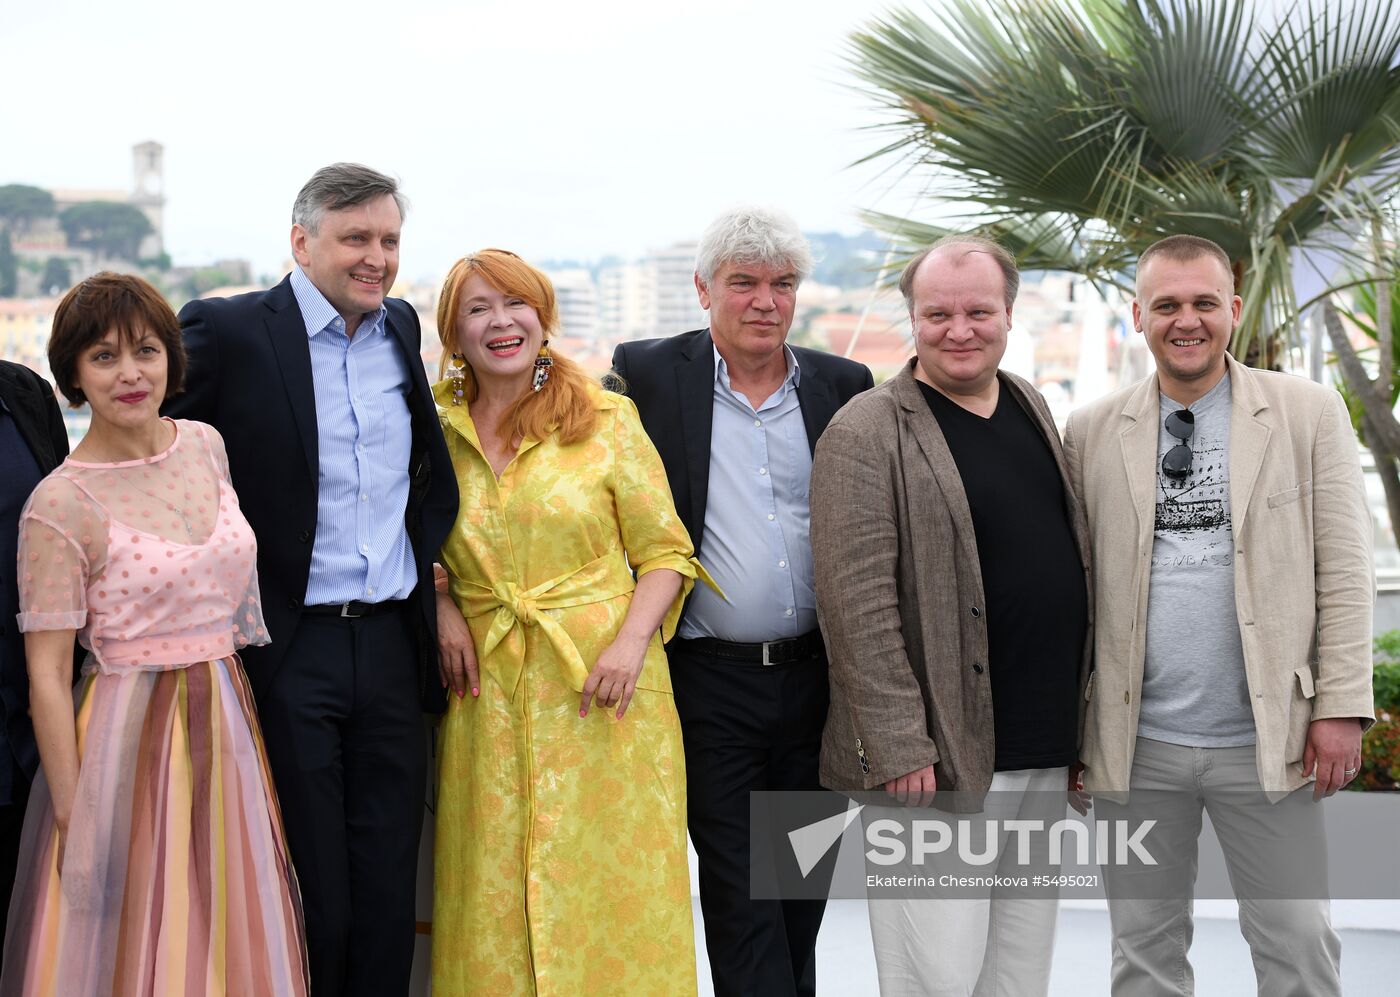 71st Cannes Film Festival. Day two